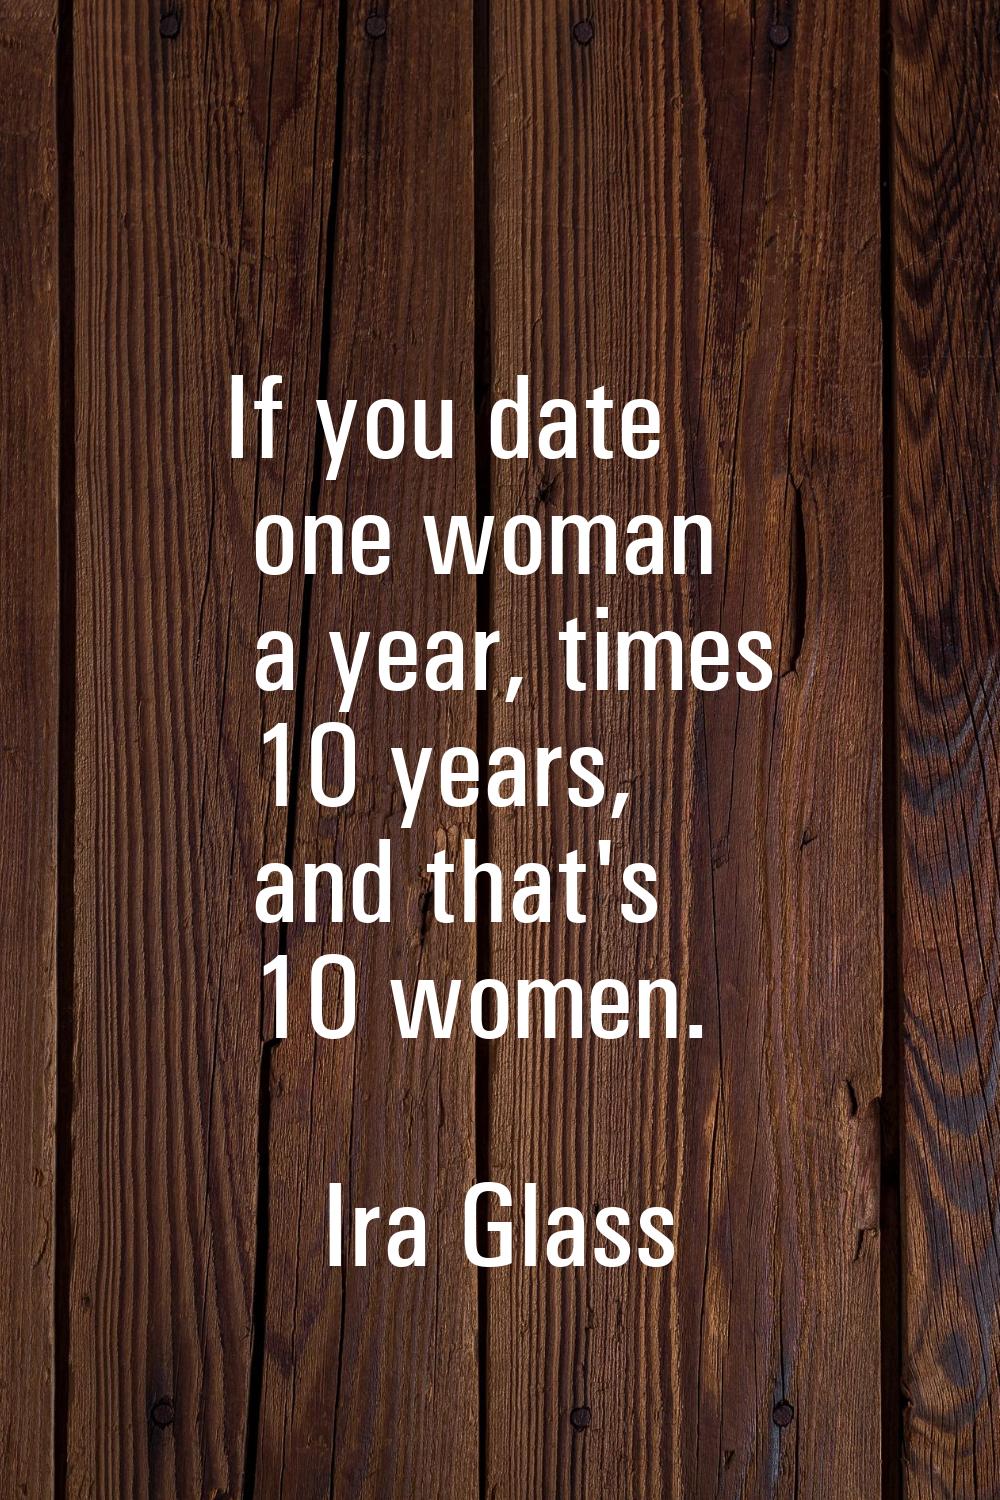 If you date one woman a year, times 10 years, and that's 10 women.